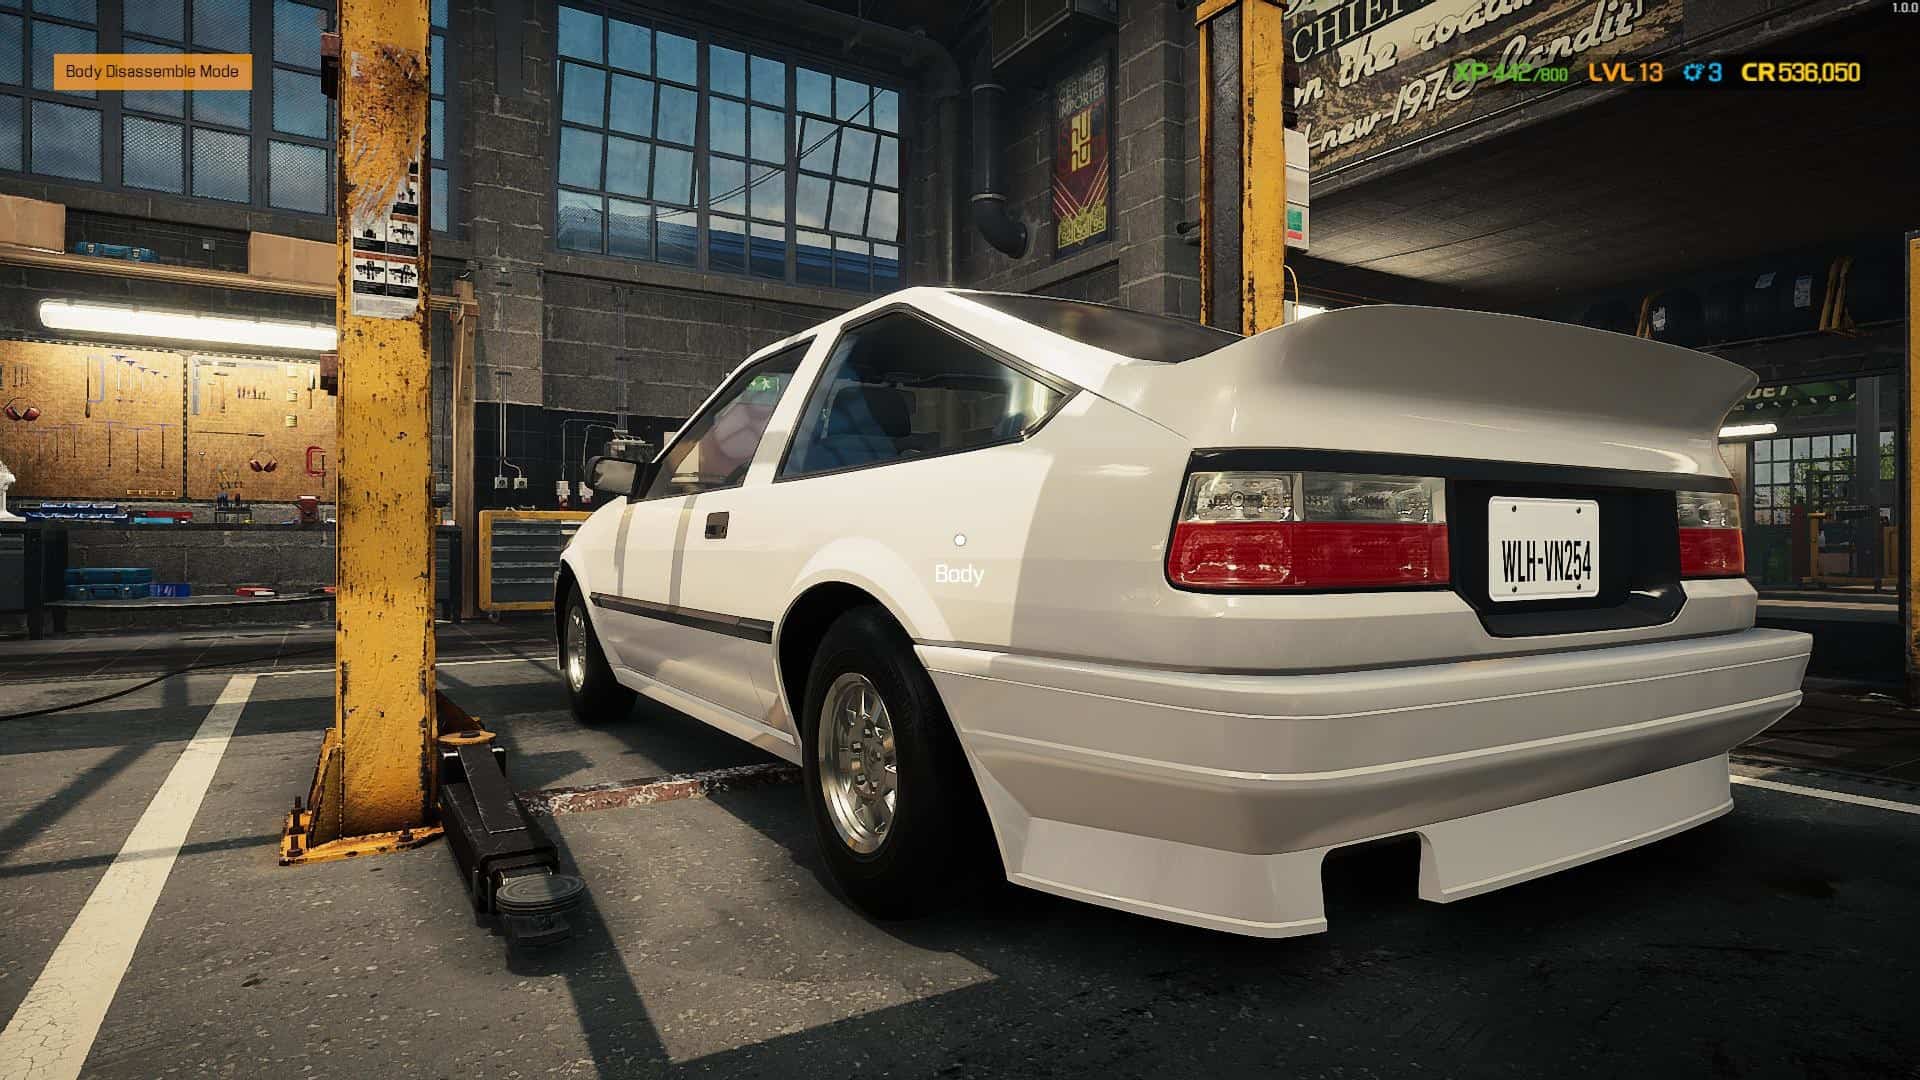 Car Mechanic Simulator Demo available now on Steam